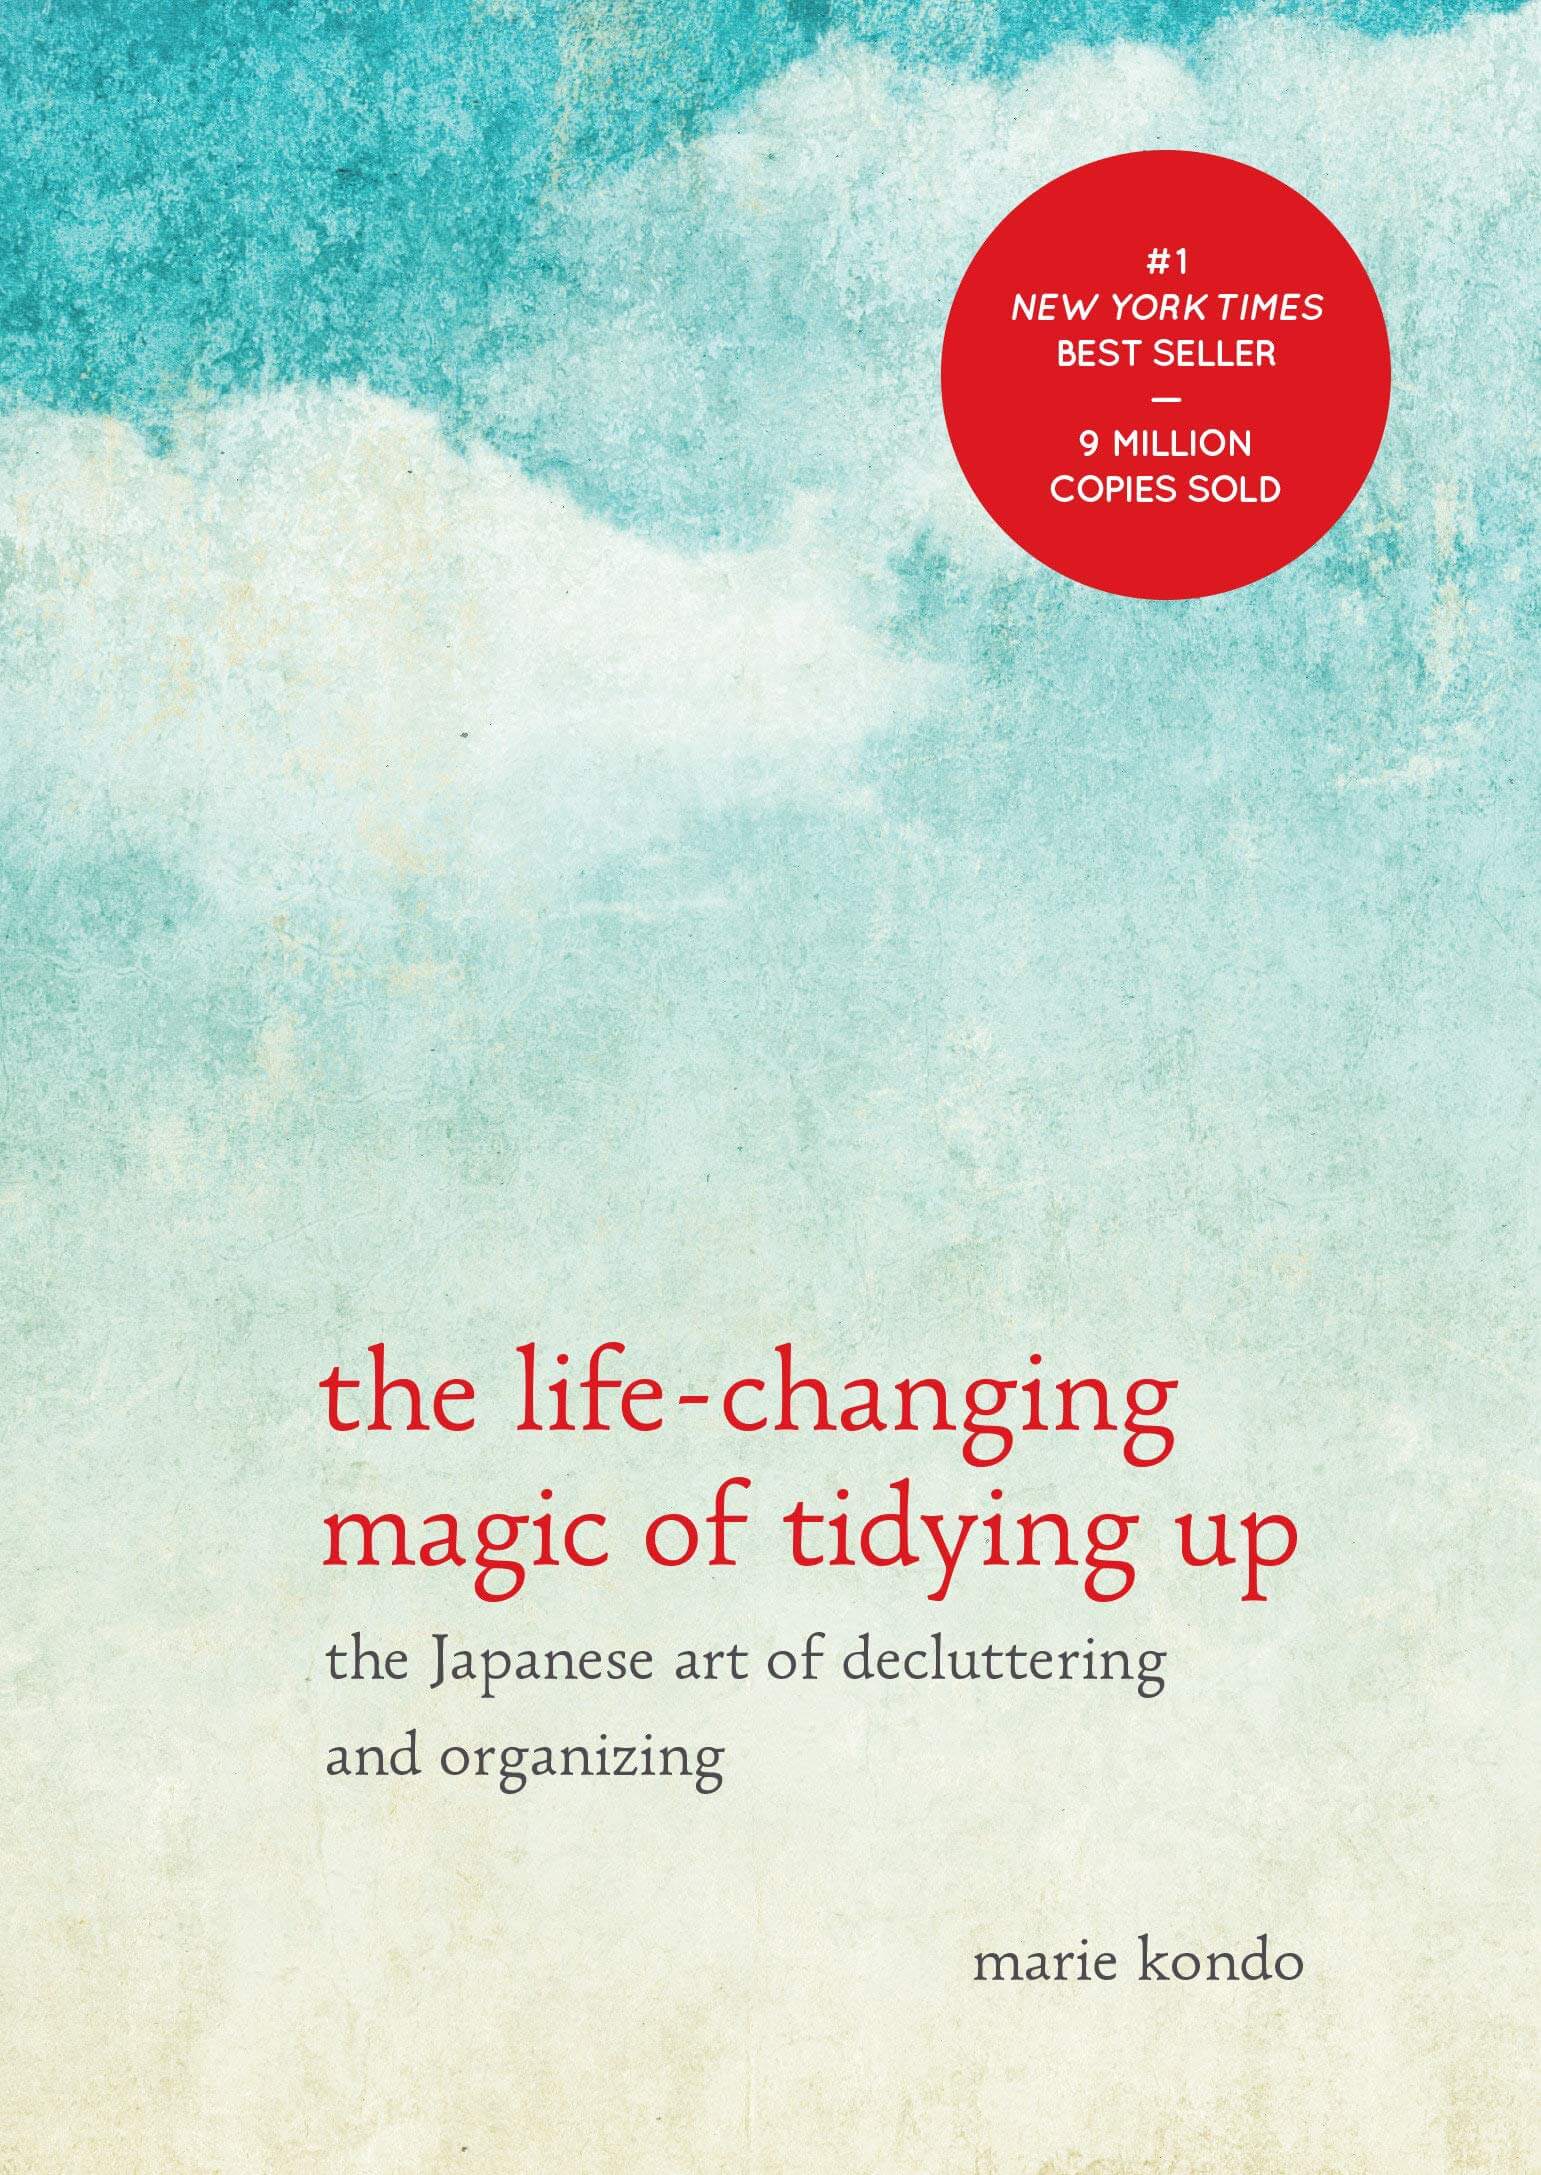 Marie Kondo: The Life-Changing Magic of Tidying Up (Hardcover, 2014, Ten Speed Press)